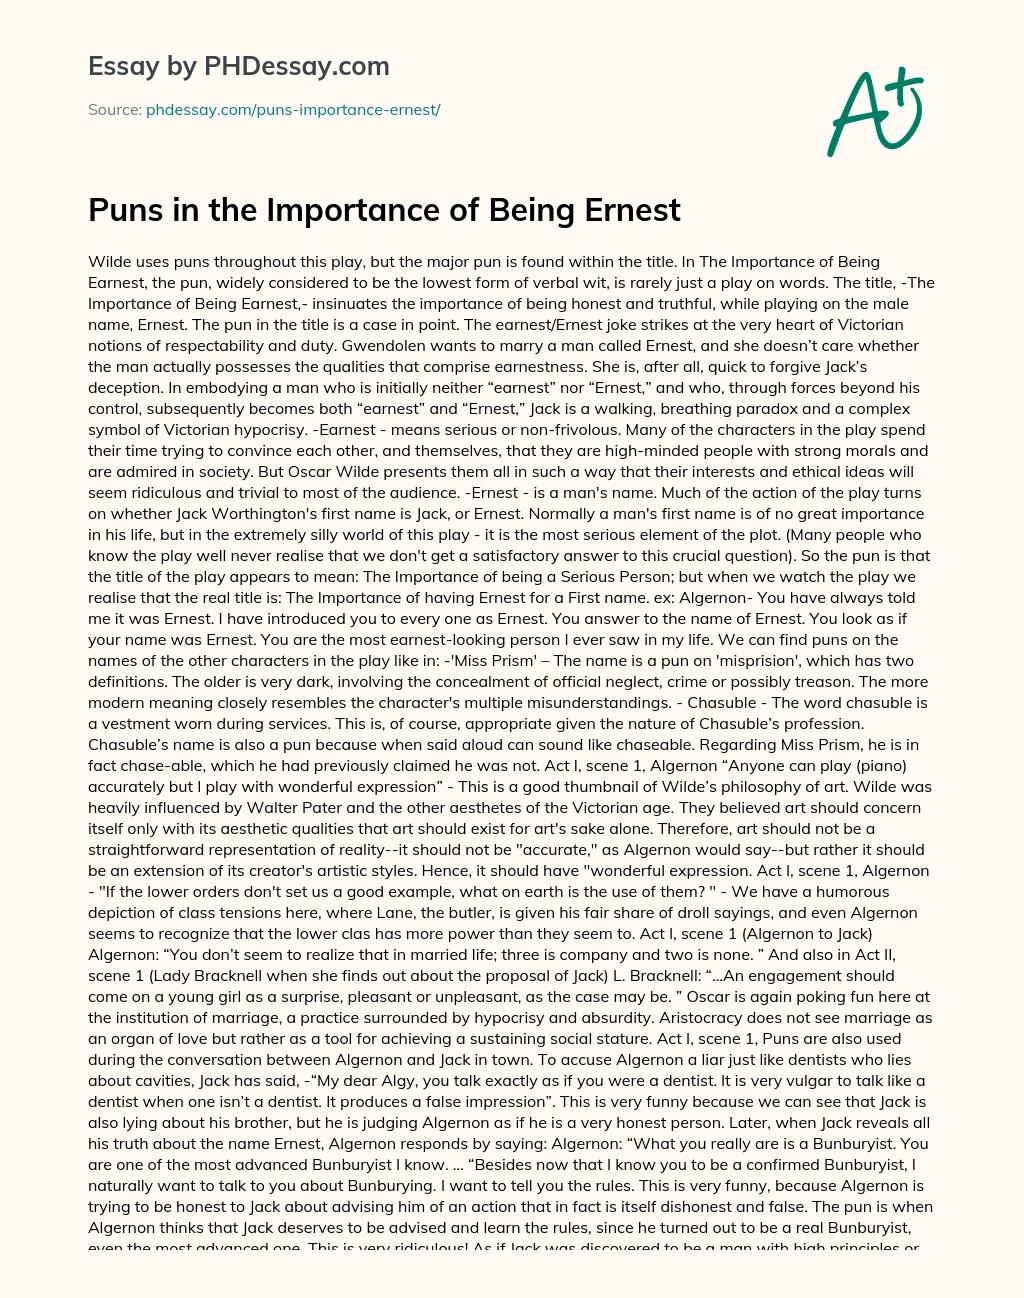 Puns in the Importance of Being Ernest essay